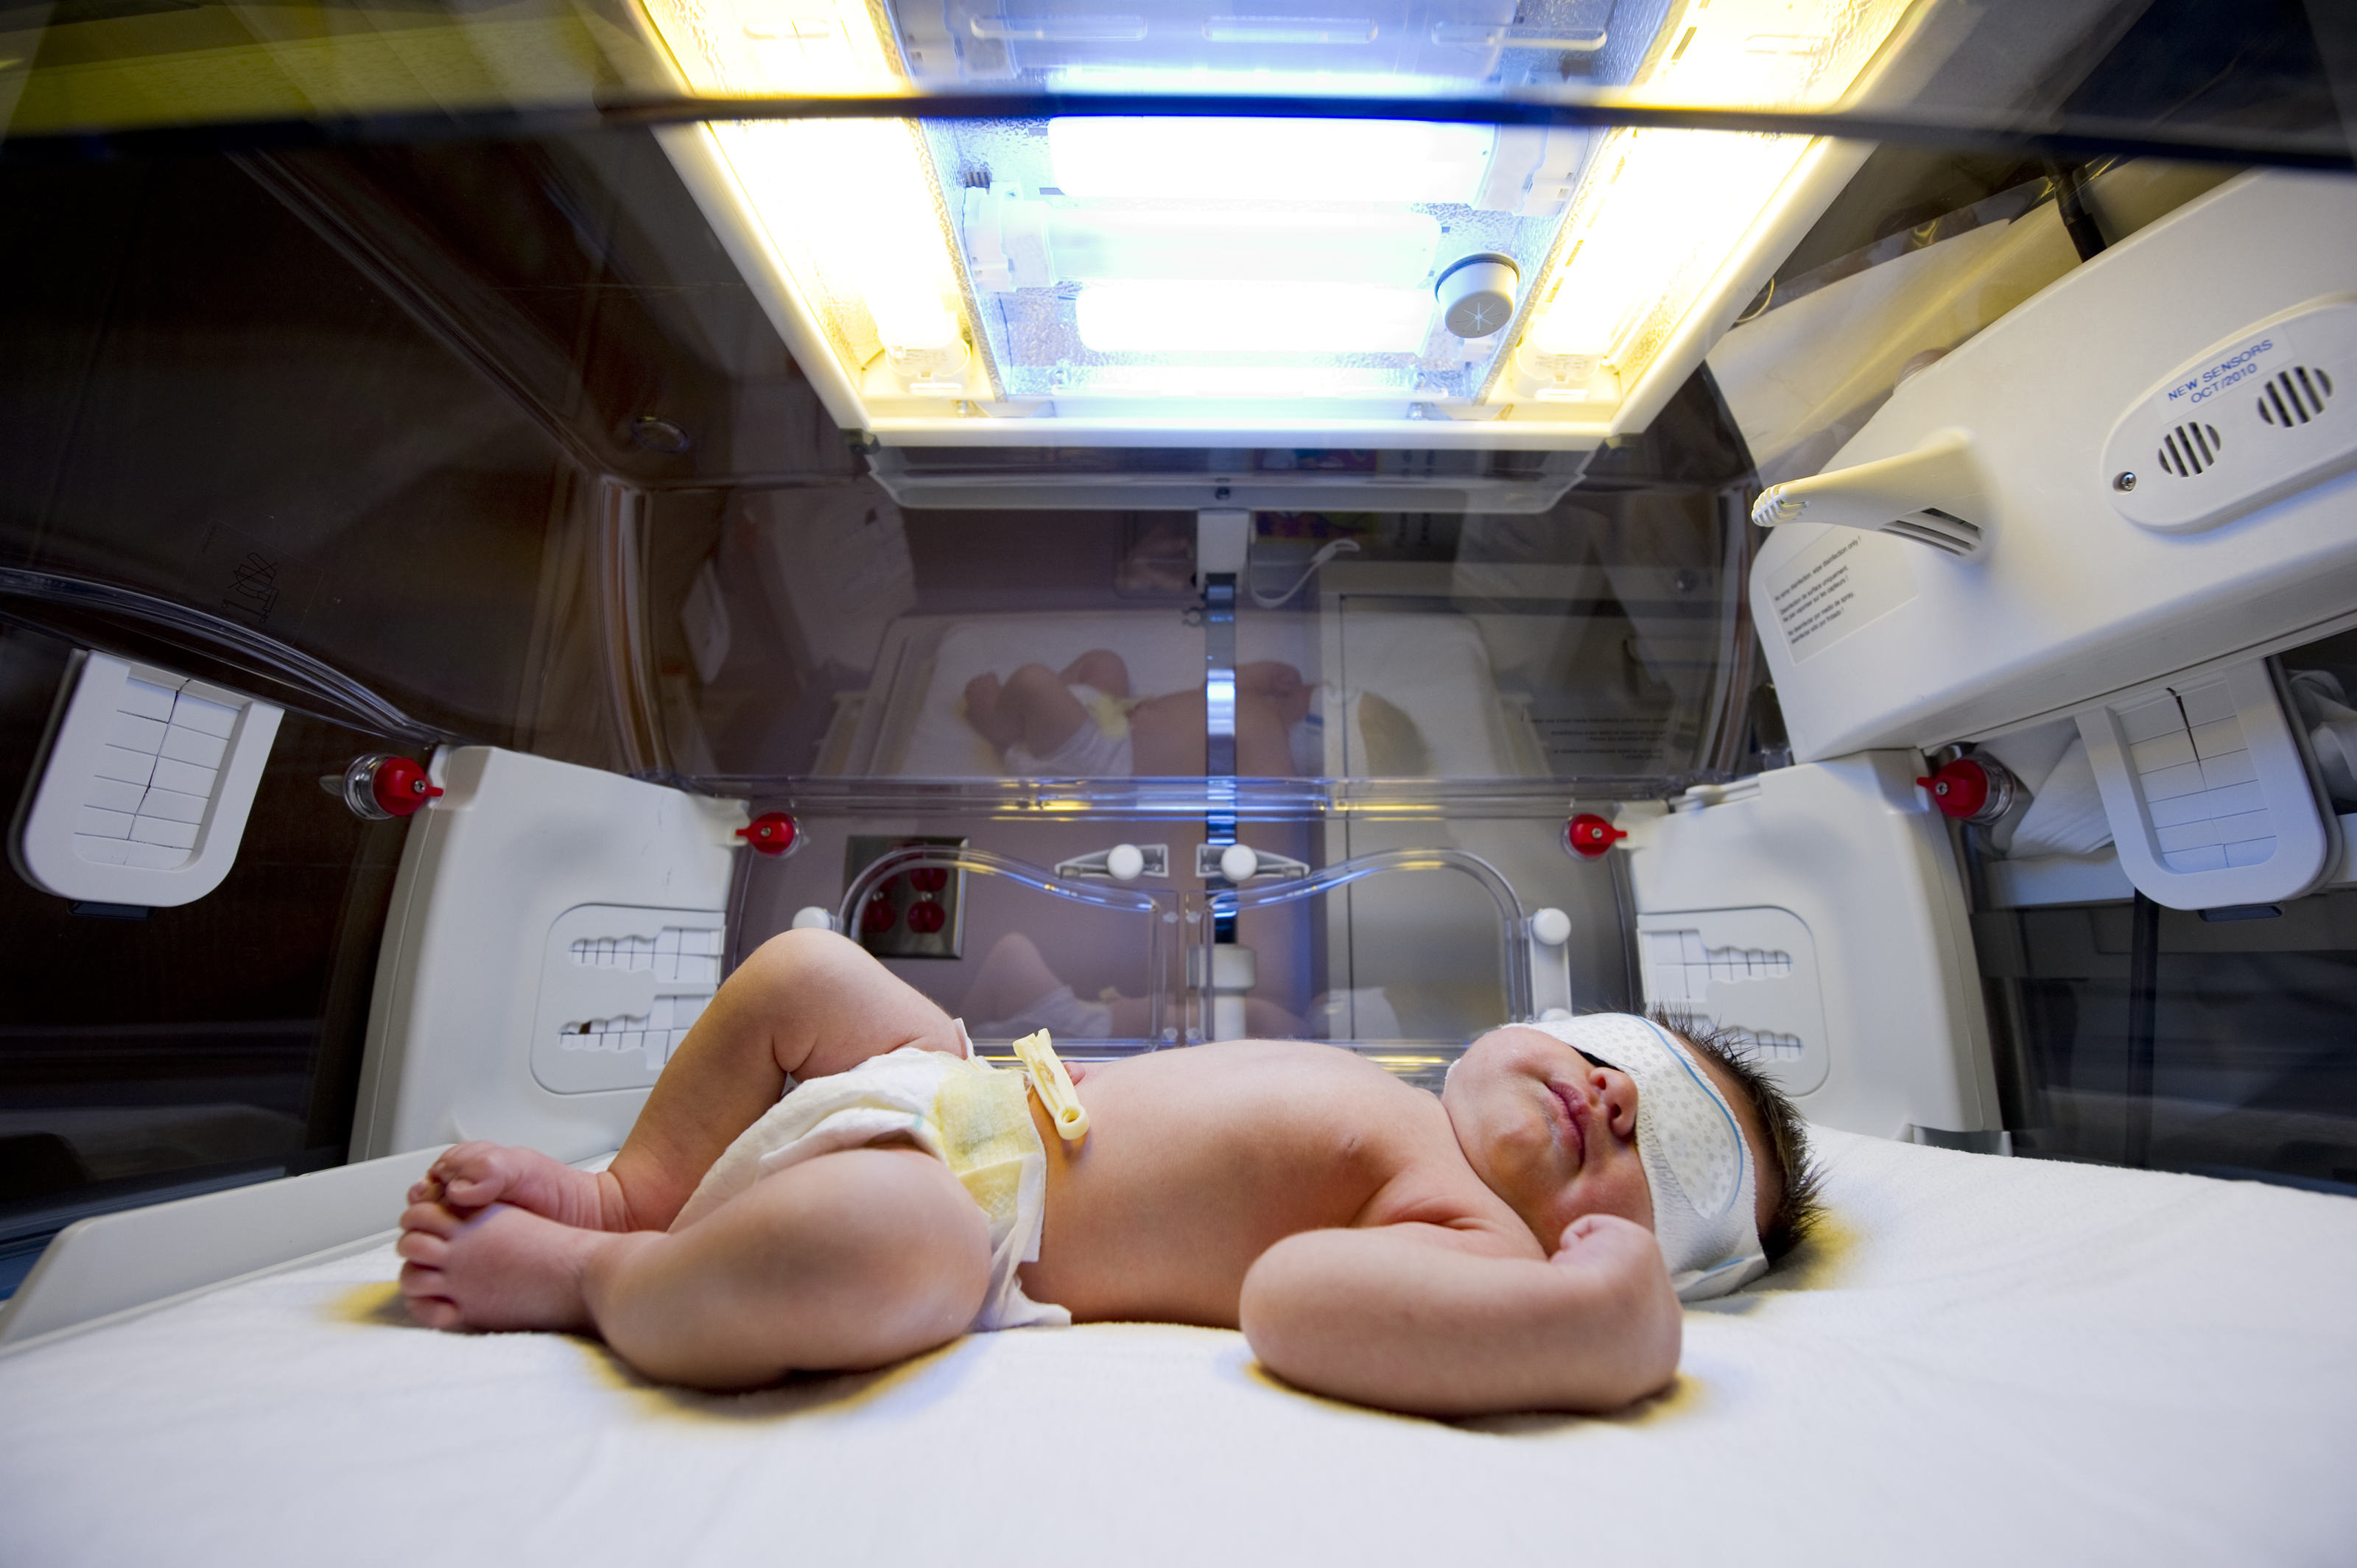 Infant Jaundice: 5 Things Expecting Parents Should Know